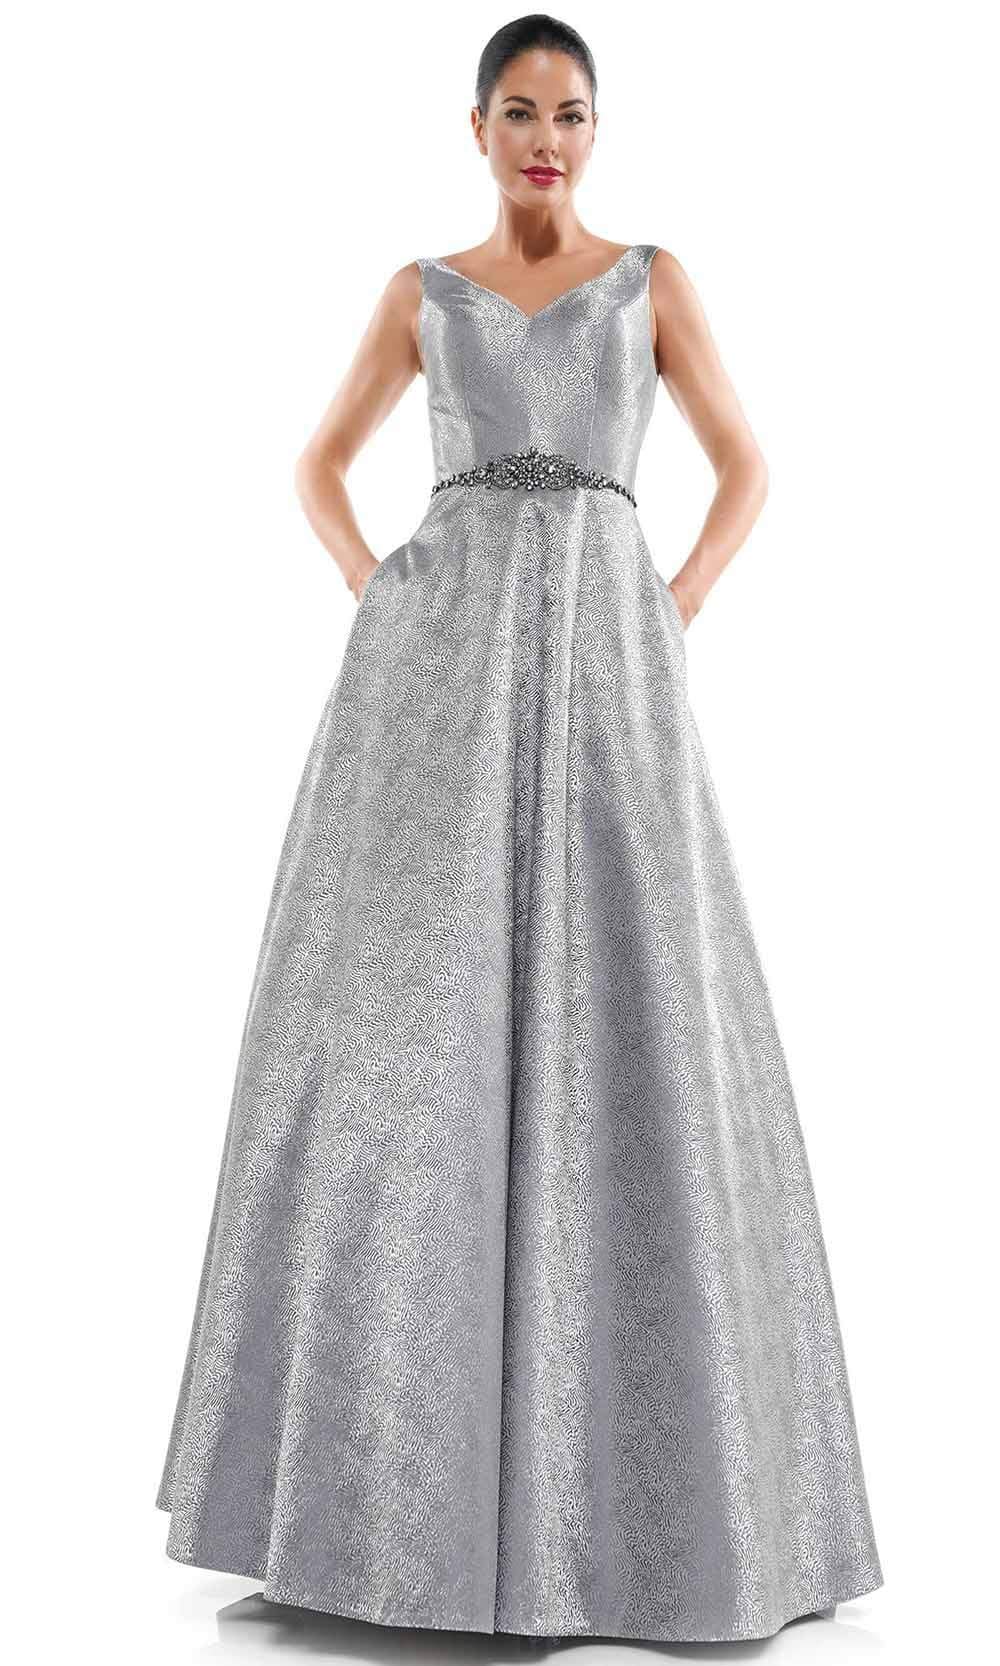 Marsoni by Colors - MV1033 Sleeveless V-Neck Beaded Waist Brocade Gown Mother of the Bride Dresses 4 / Silver